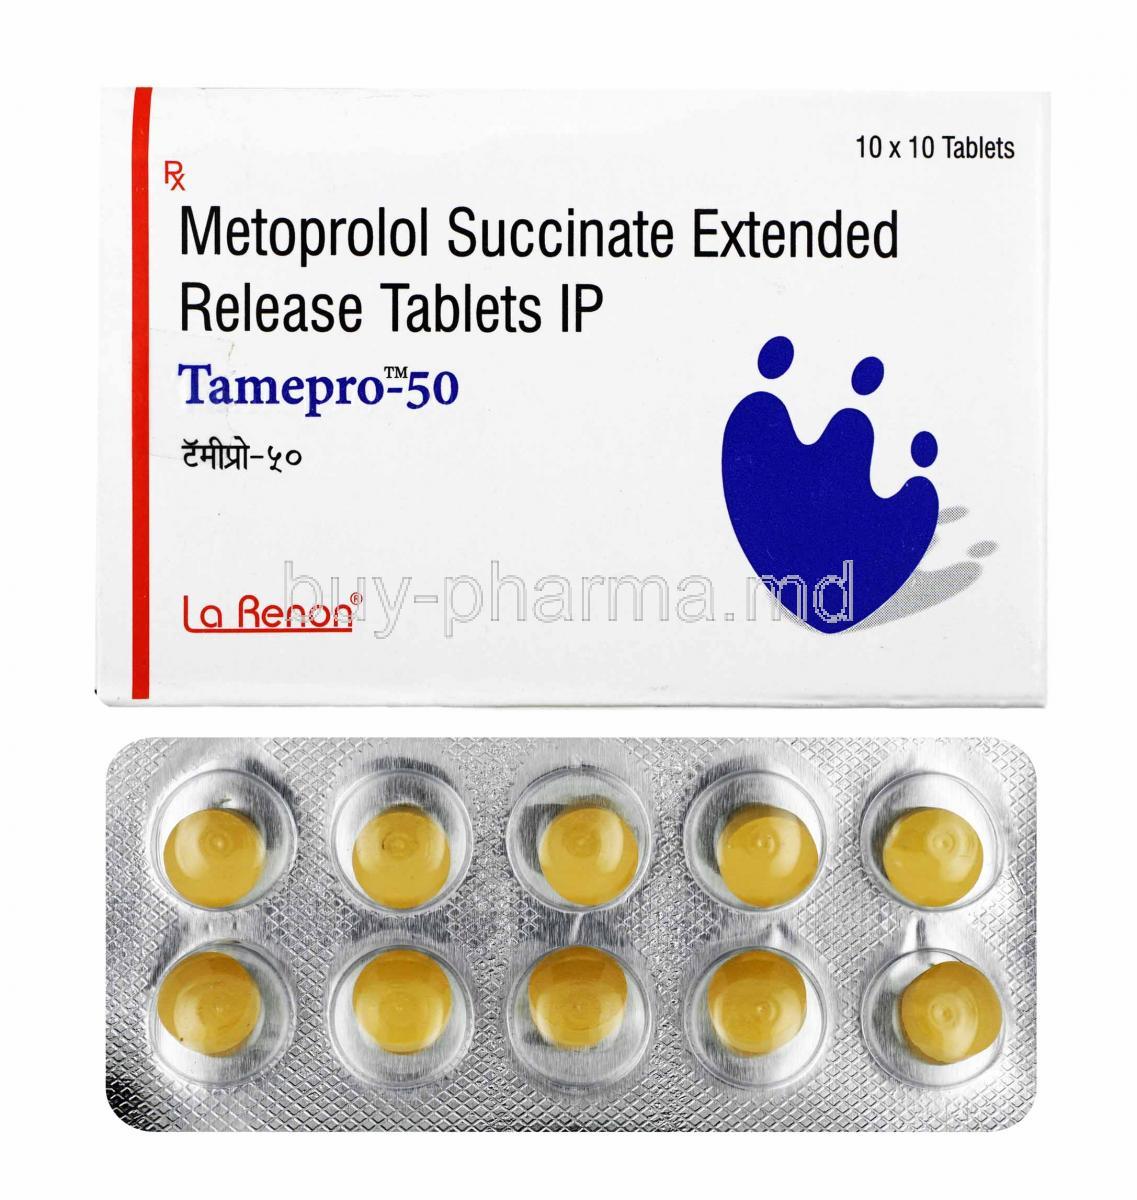 Tamepro, Metoprolol Succinate 50mg box and tablets